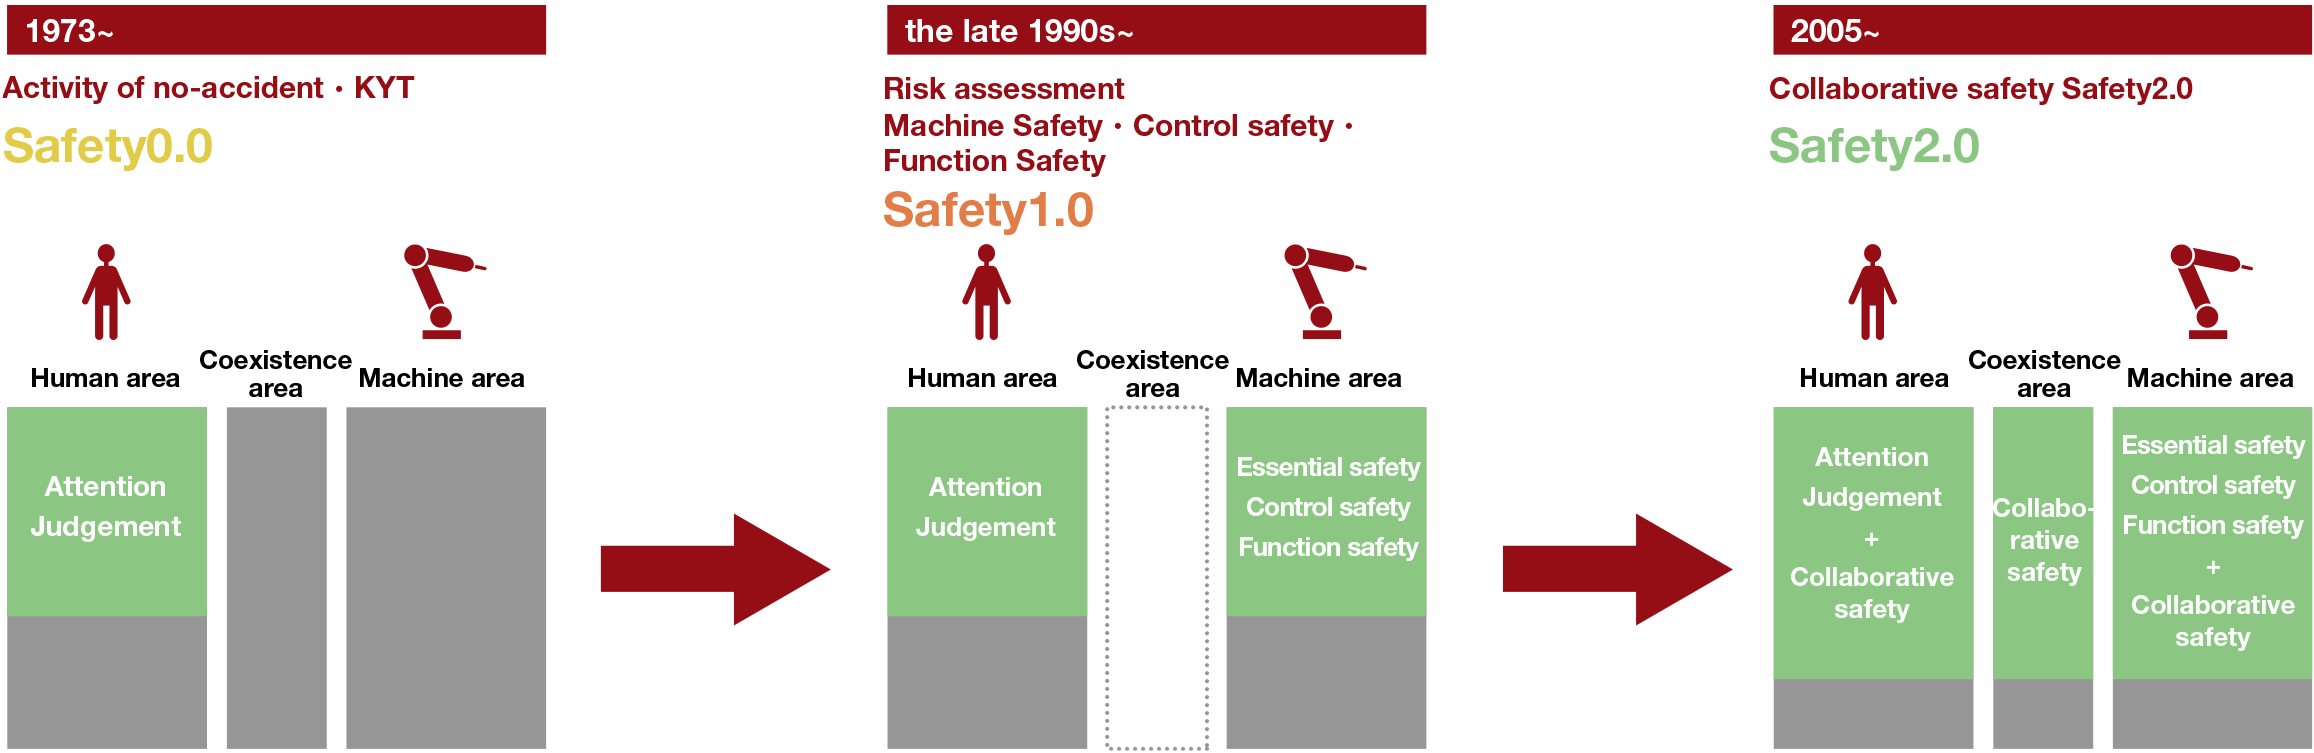 Changes in the way of thinking about ensuring human safety